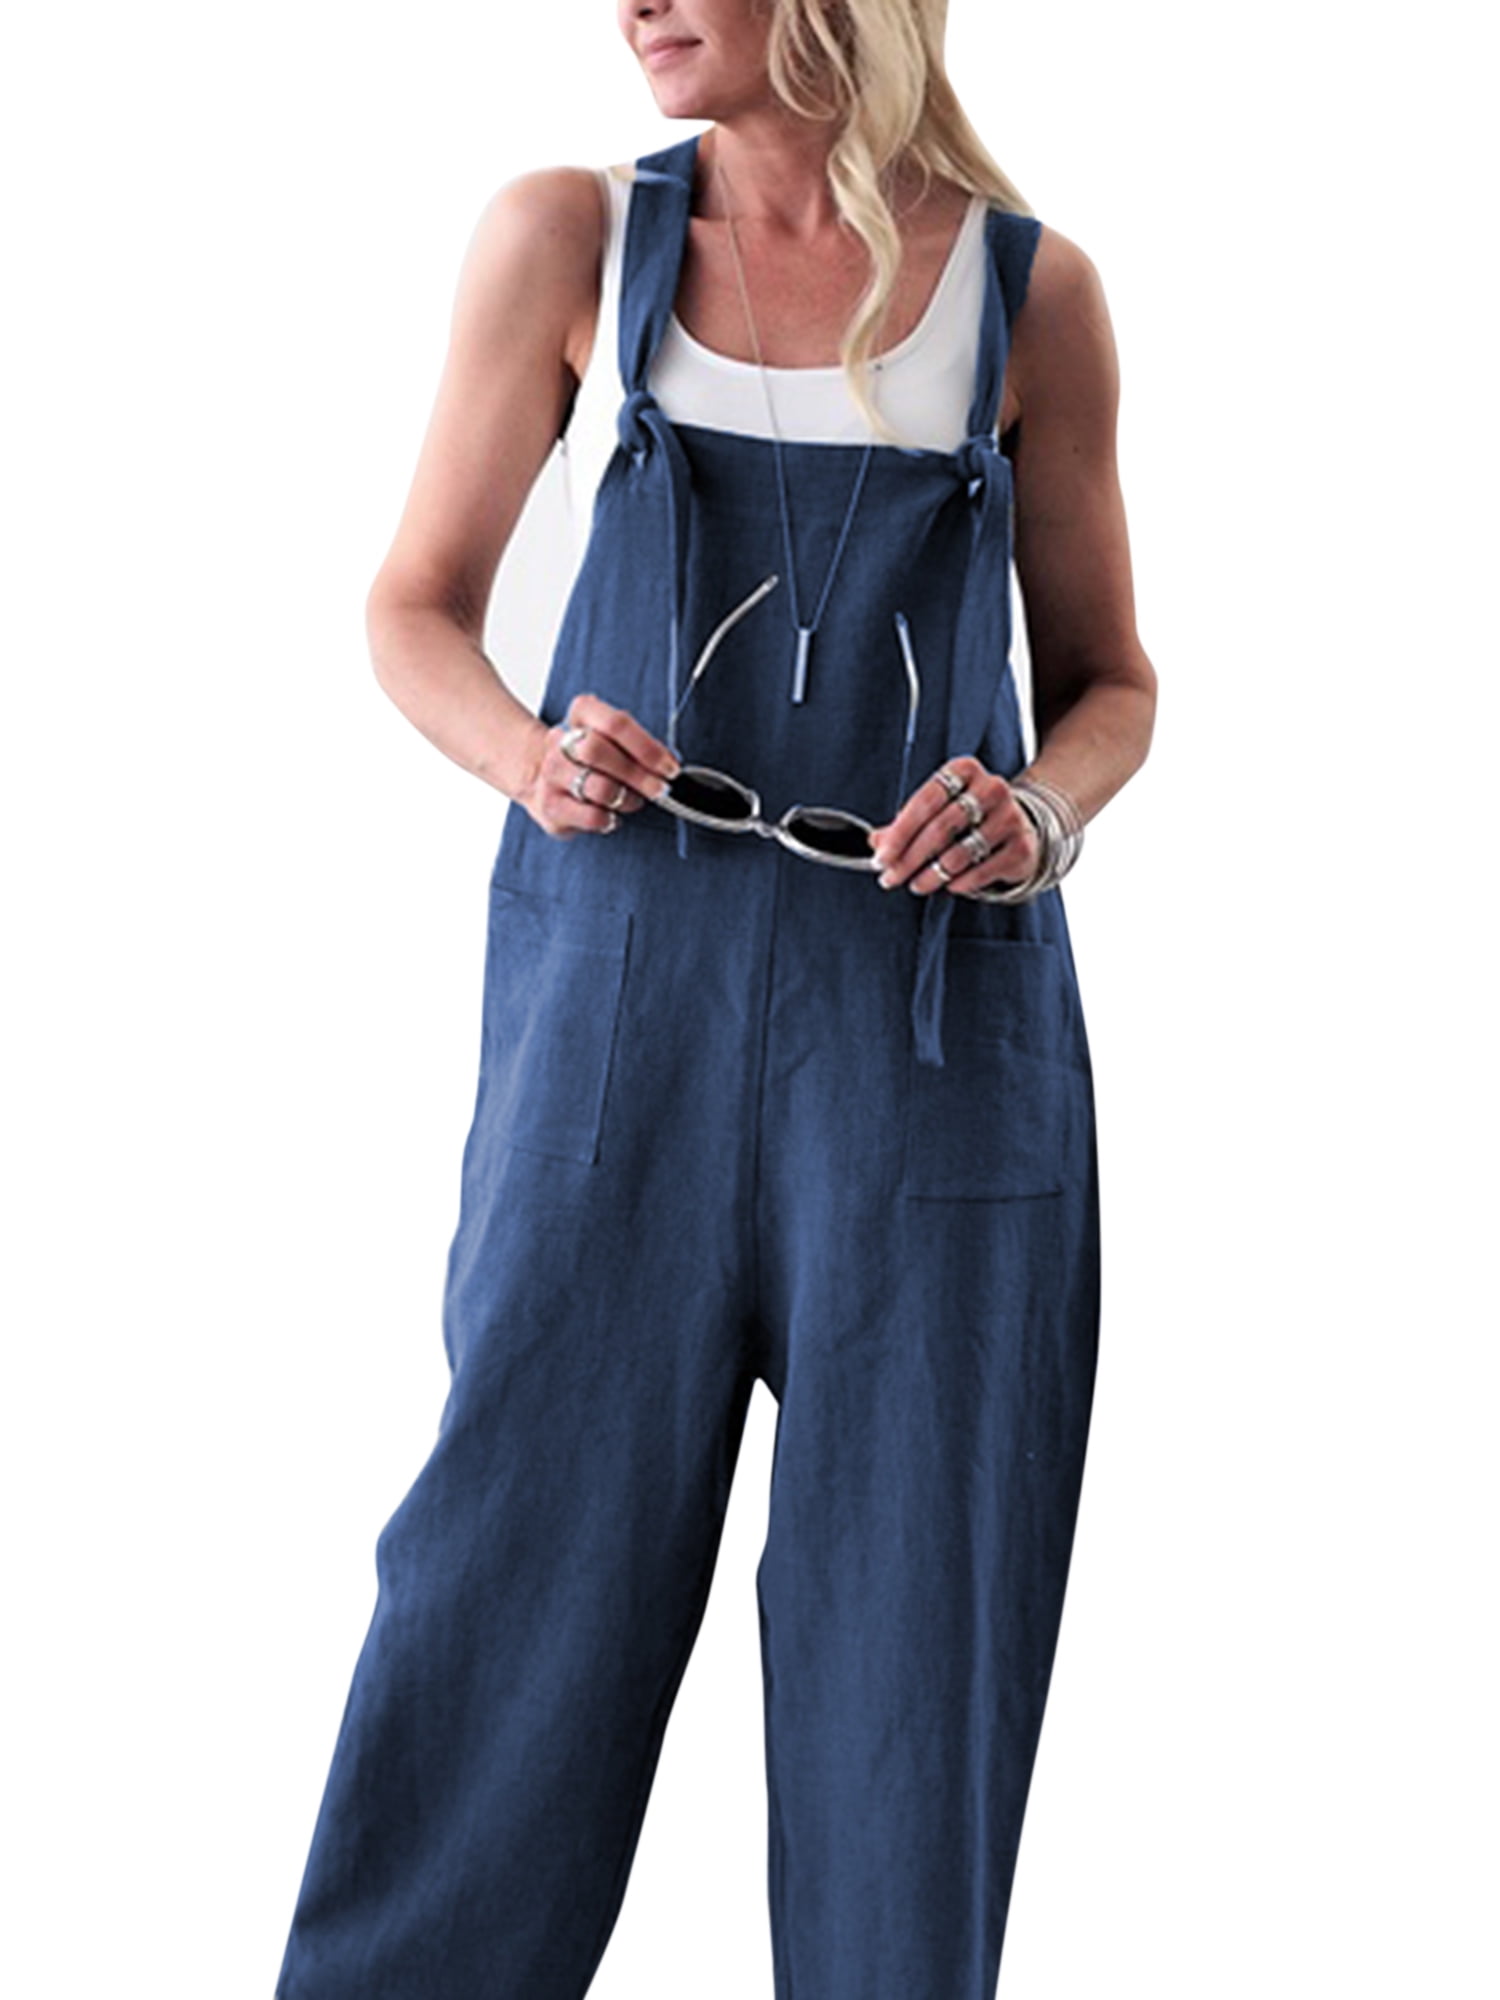 Ladies Loose Fit Casual Baggy Denim Bib Jeans Overalls Ripped Denim Jumpsuits Rompers Full Length Pants Trouser with Pockets Women's Dungarees 